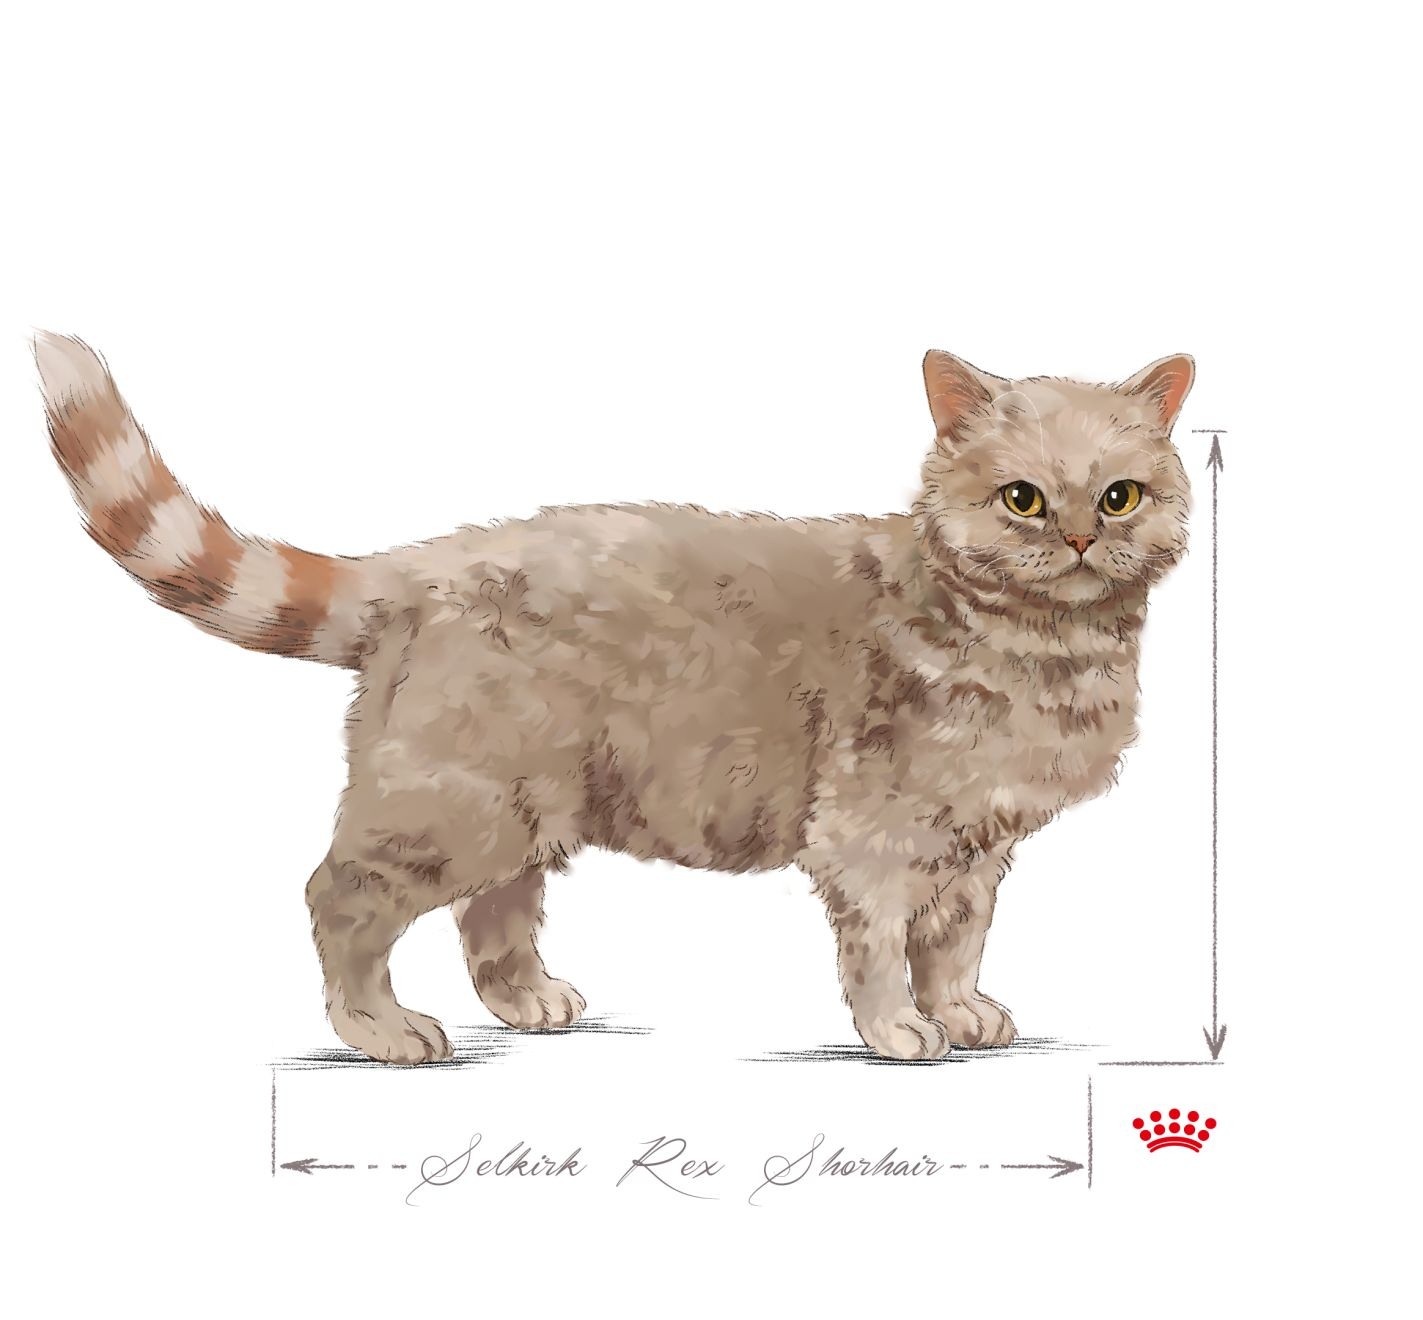 Selkirk rex adult black and white